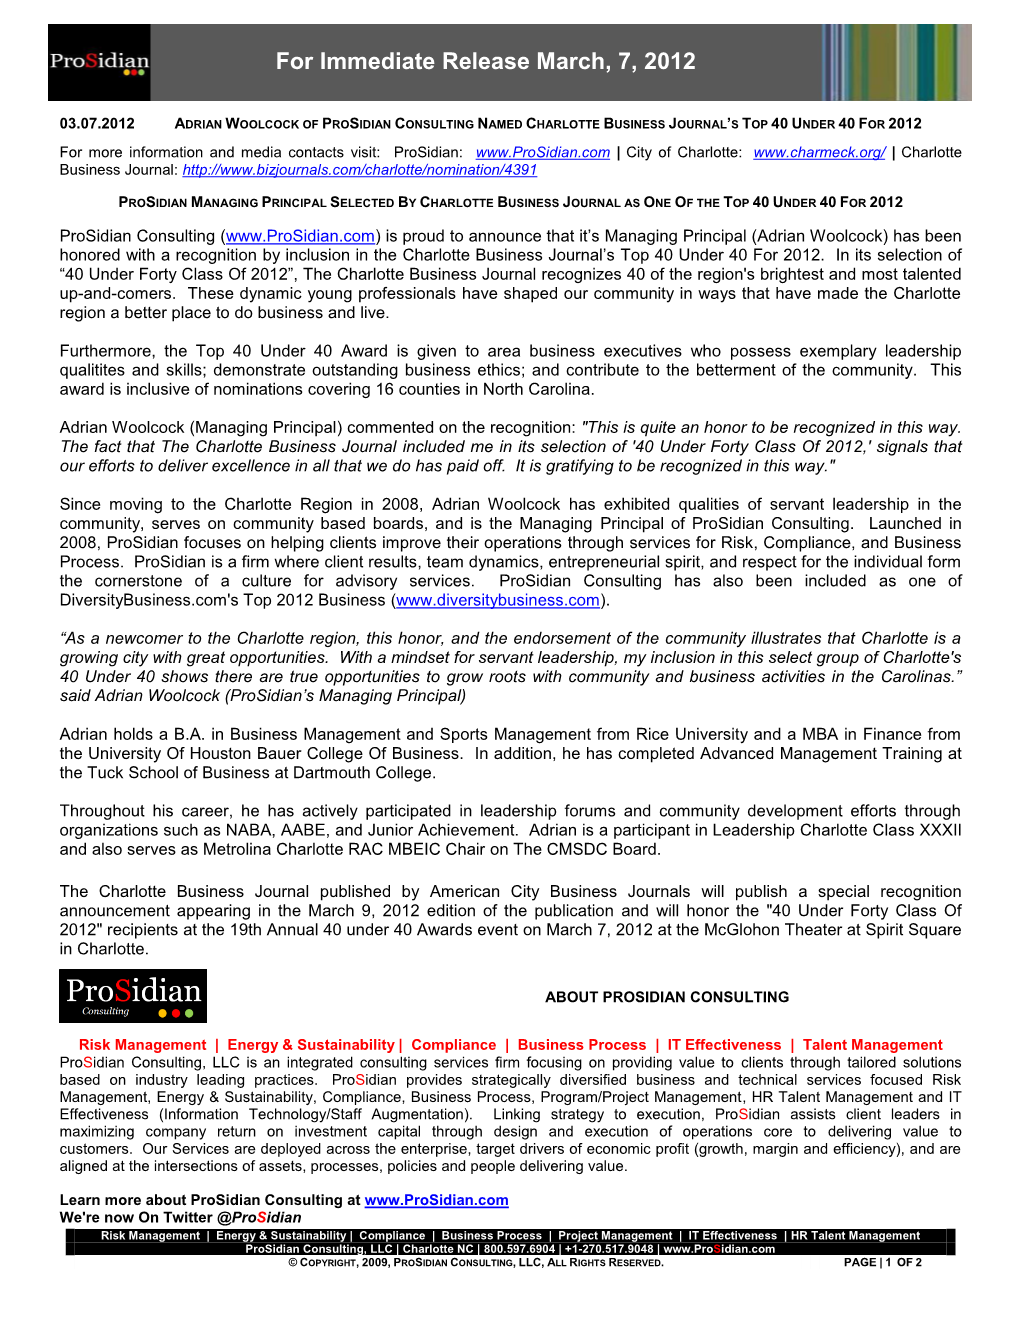 Prosidian Consulting Press Release